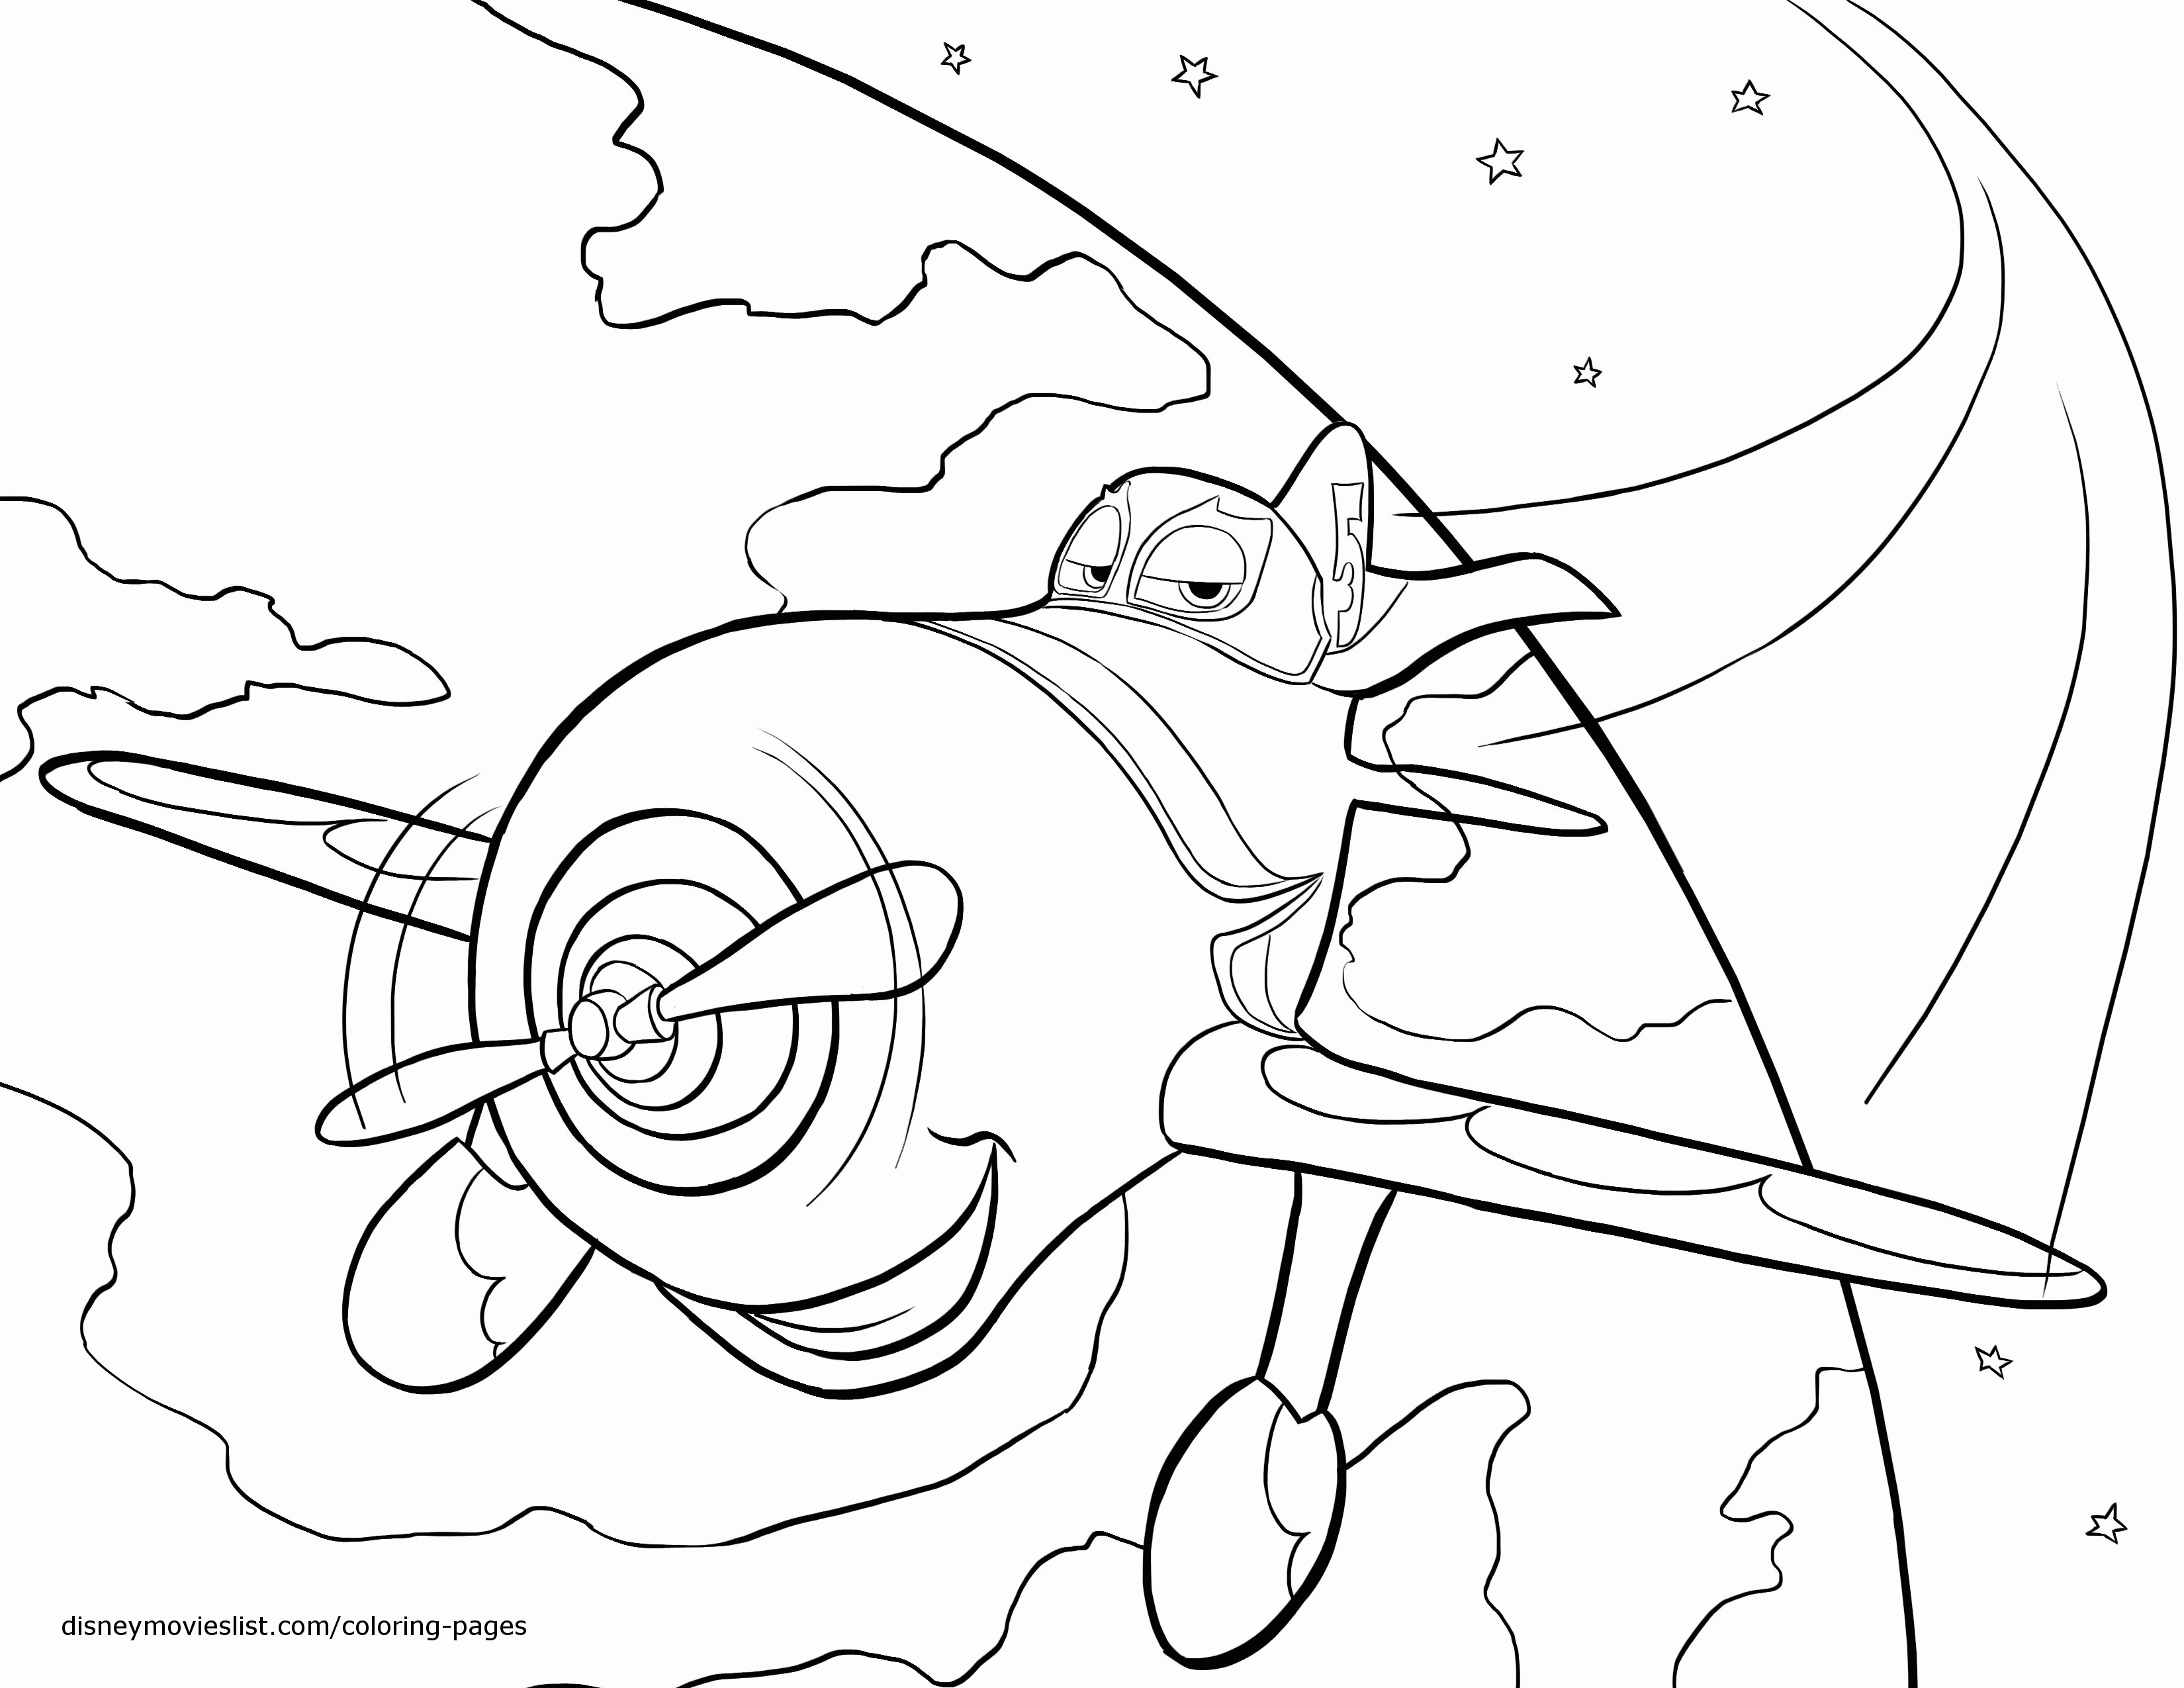 Disney Movies - Coloring Pages for Kids and for Adults